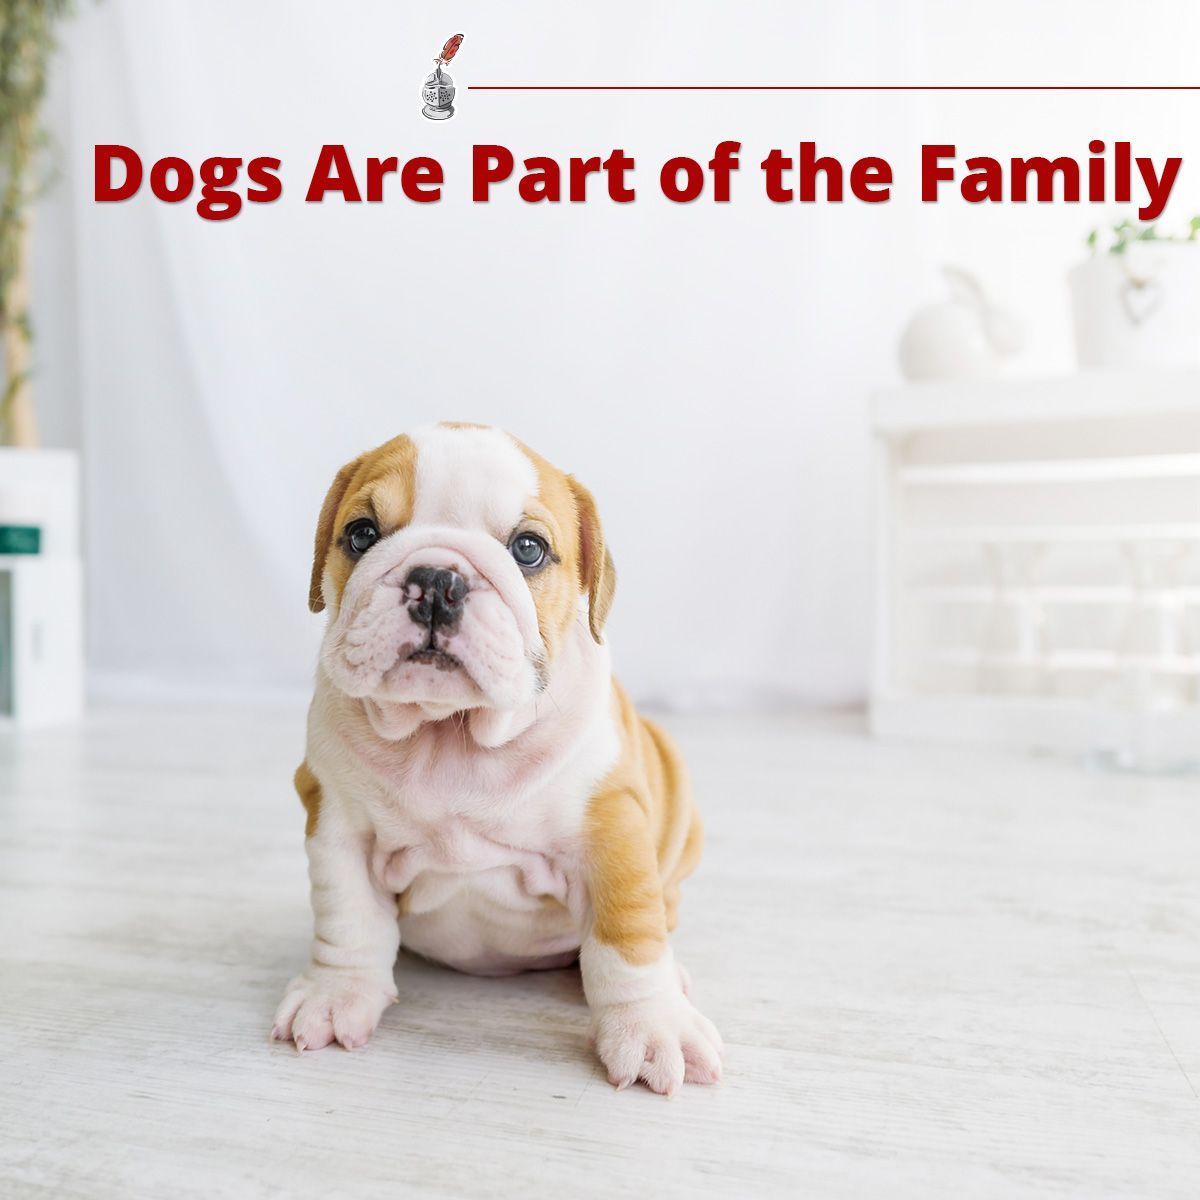 Dogs Are Part of the Family